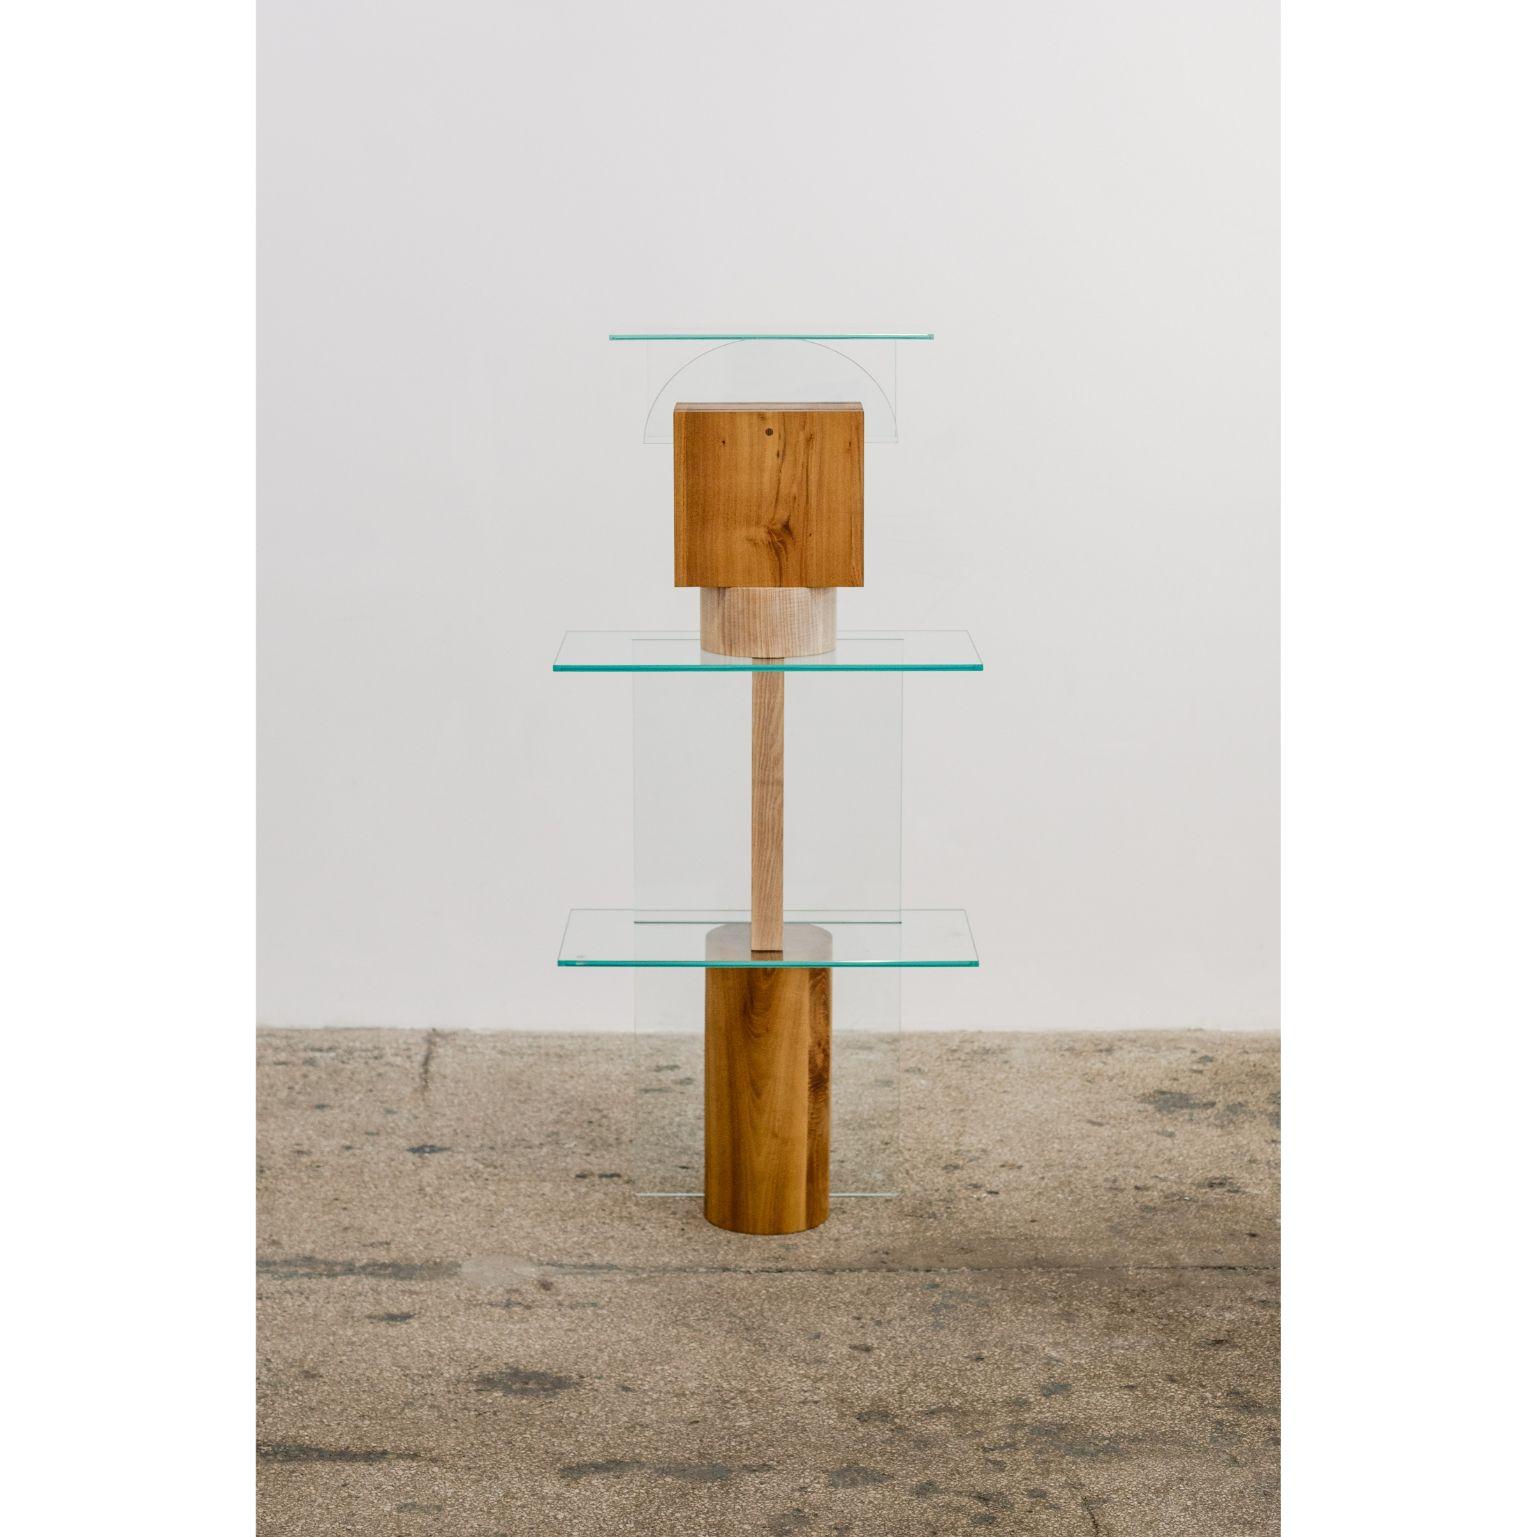 Form 2 by Radu Abraham
A limited series of 10, currently at nr. 2
Materials: Acacia wood, ash wood, glass
Dimensions: 60 x 30 x 132 cm

Massive rectangular and round shapes, made out of acacia and ash wood; the totem is made out of 3 smaller